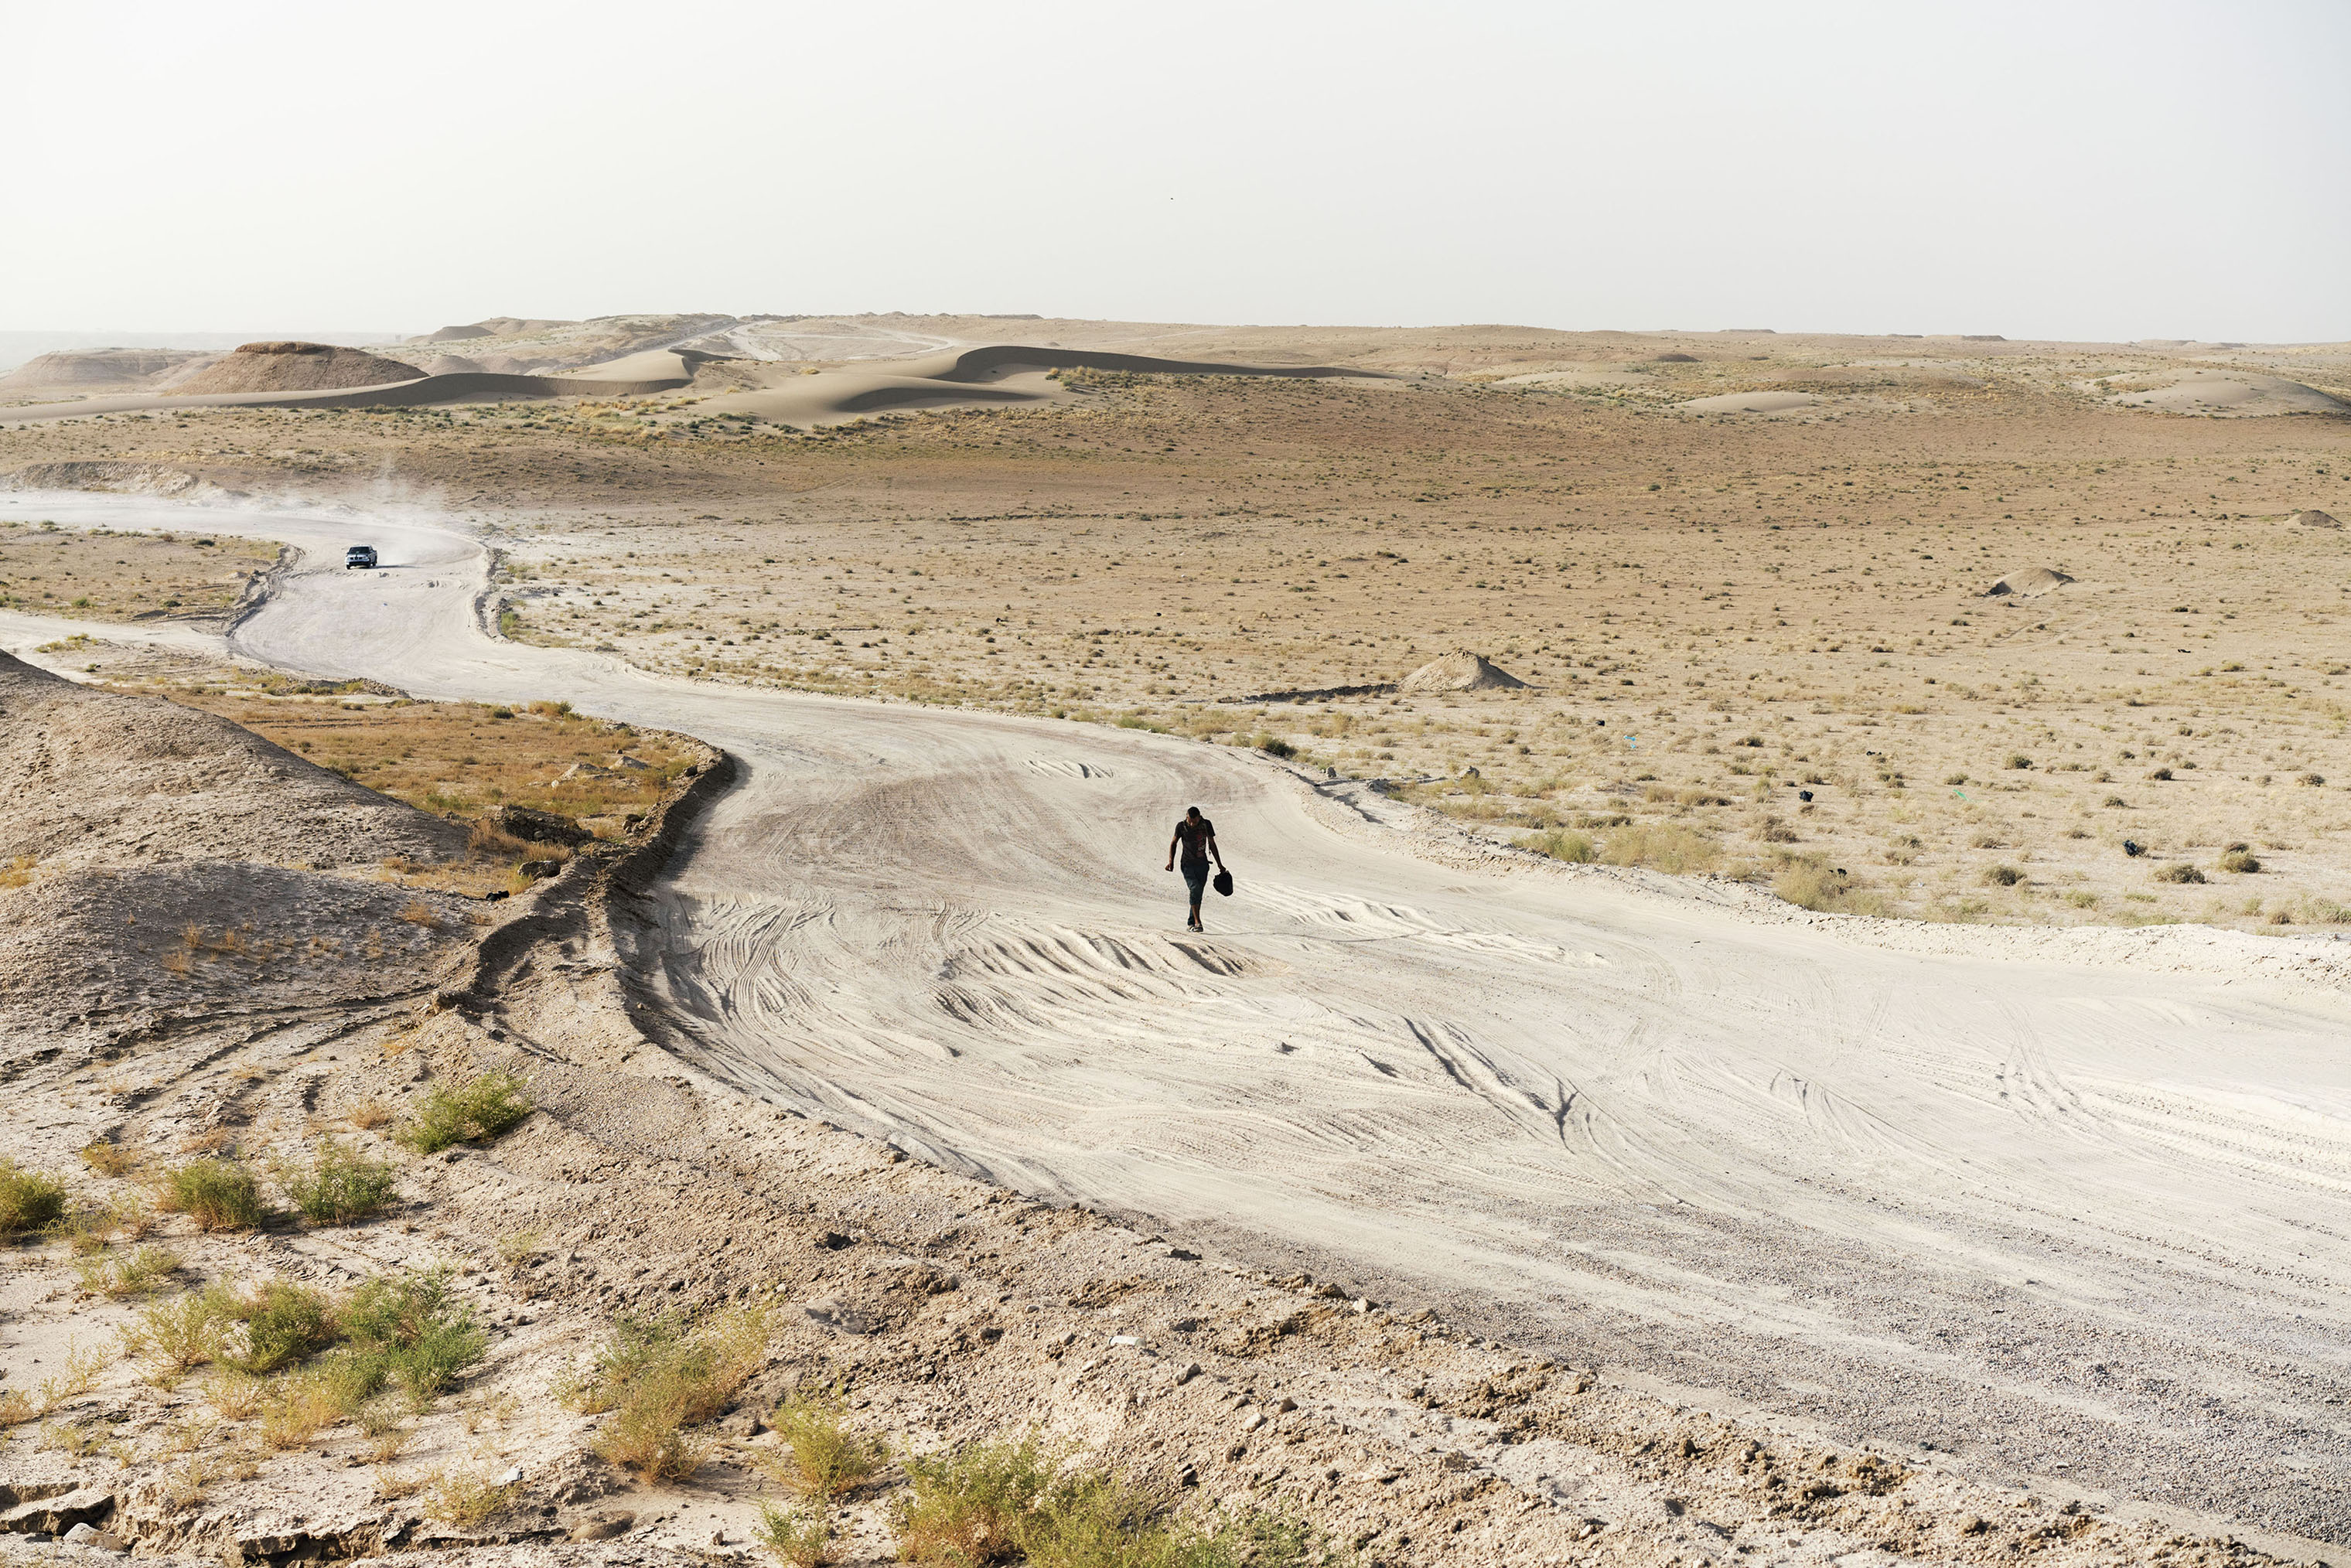 A man walks along a desert road near the town of Khalidiyah, in Iraq's Anbar Province, on July 12, 2016. The man, a native of Ramadi, was displaced when ISIS arrived in the city, and now lives with his family in a camp in the nearby town of Habbaniyah. Every day, he walks from Habbaniyah to Ramadi, where he works as a laborer clearing rubble from the war-torn streets. (Moises Saman—Magnum Photos)